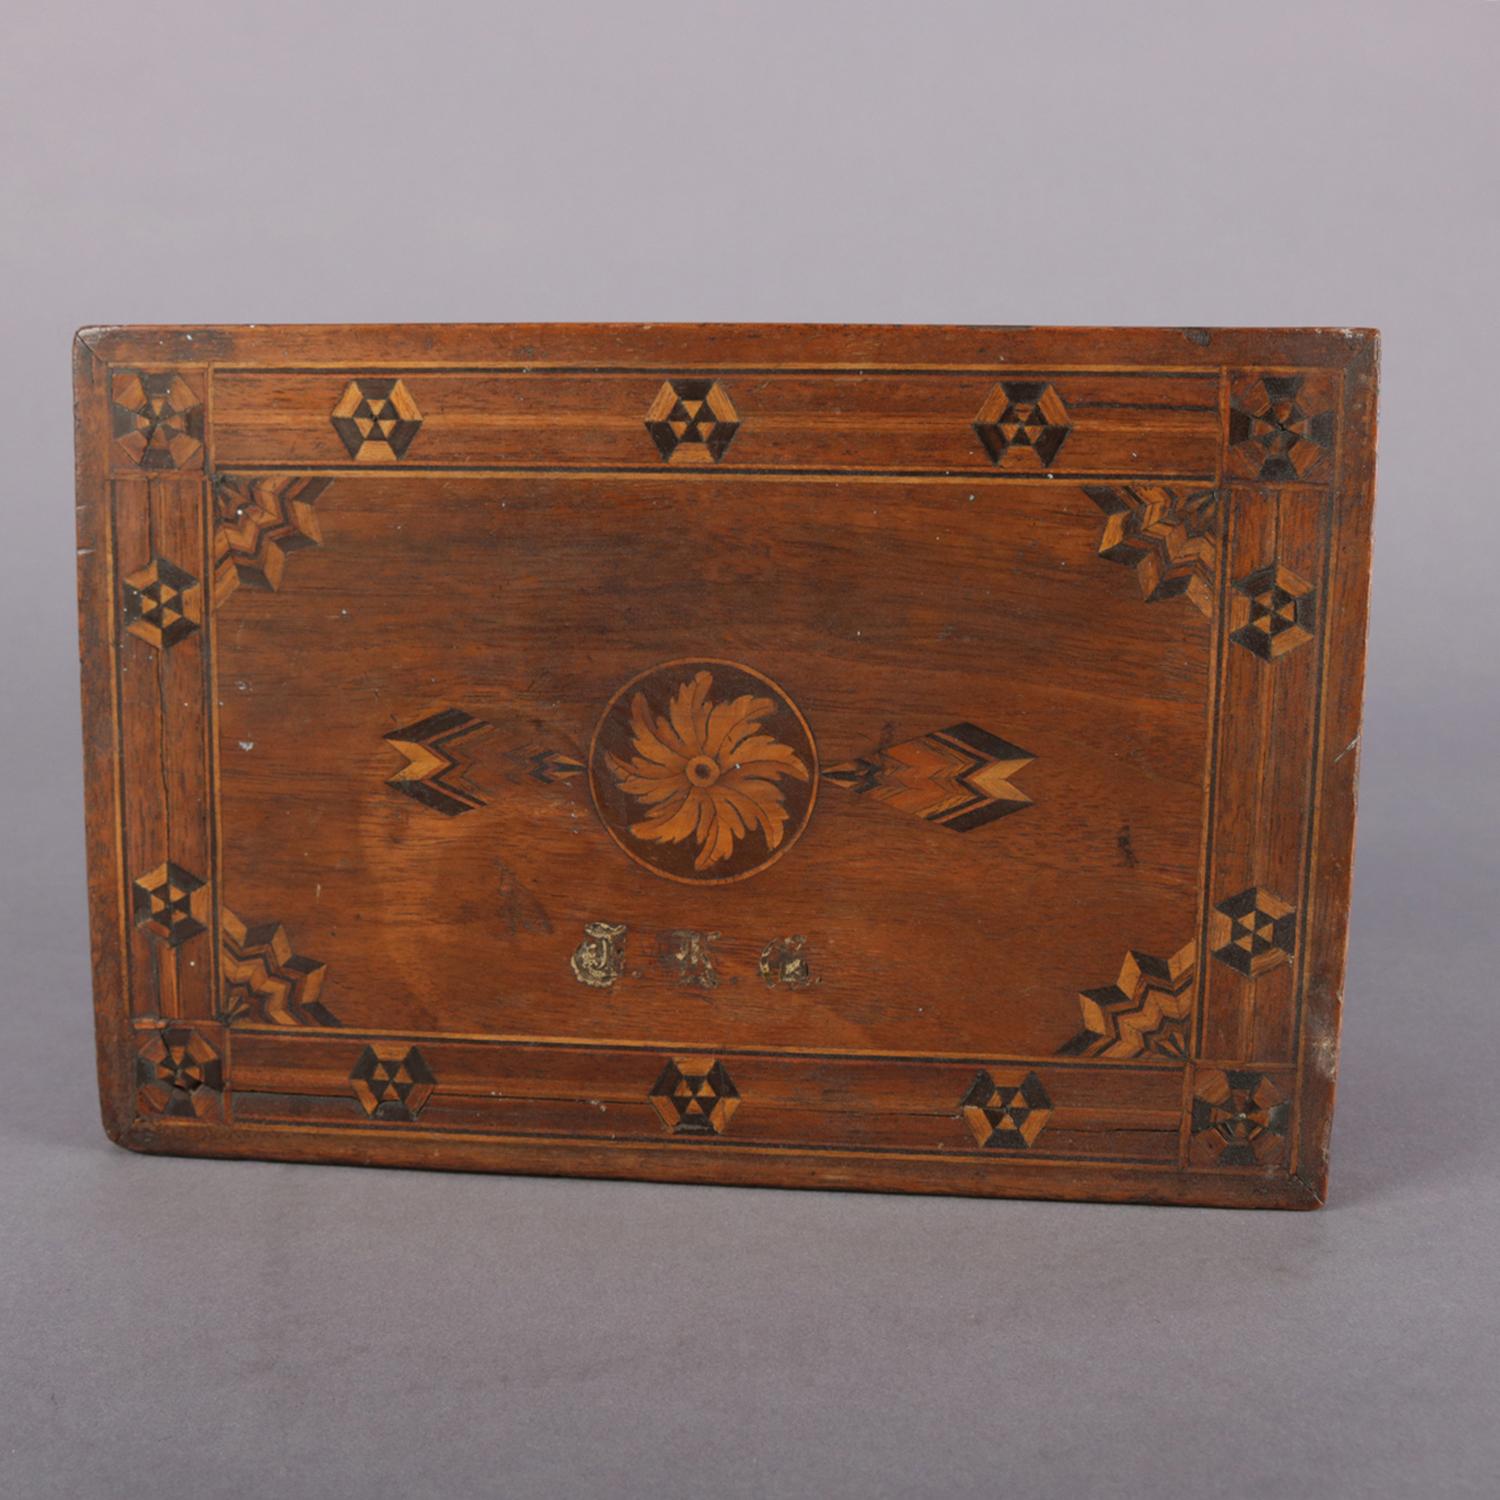 Antique English parquetry petite humidor features two toned inlay throughout including banding, central acanthus pinwheel medallion and chevron sunburst corners, handles, lined interior, and monogrammed top, 19th century

Measures: 4.5